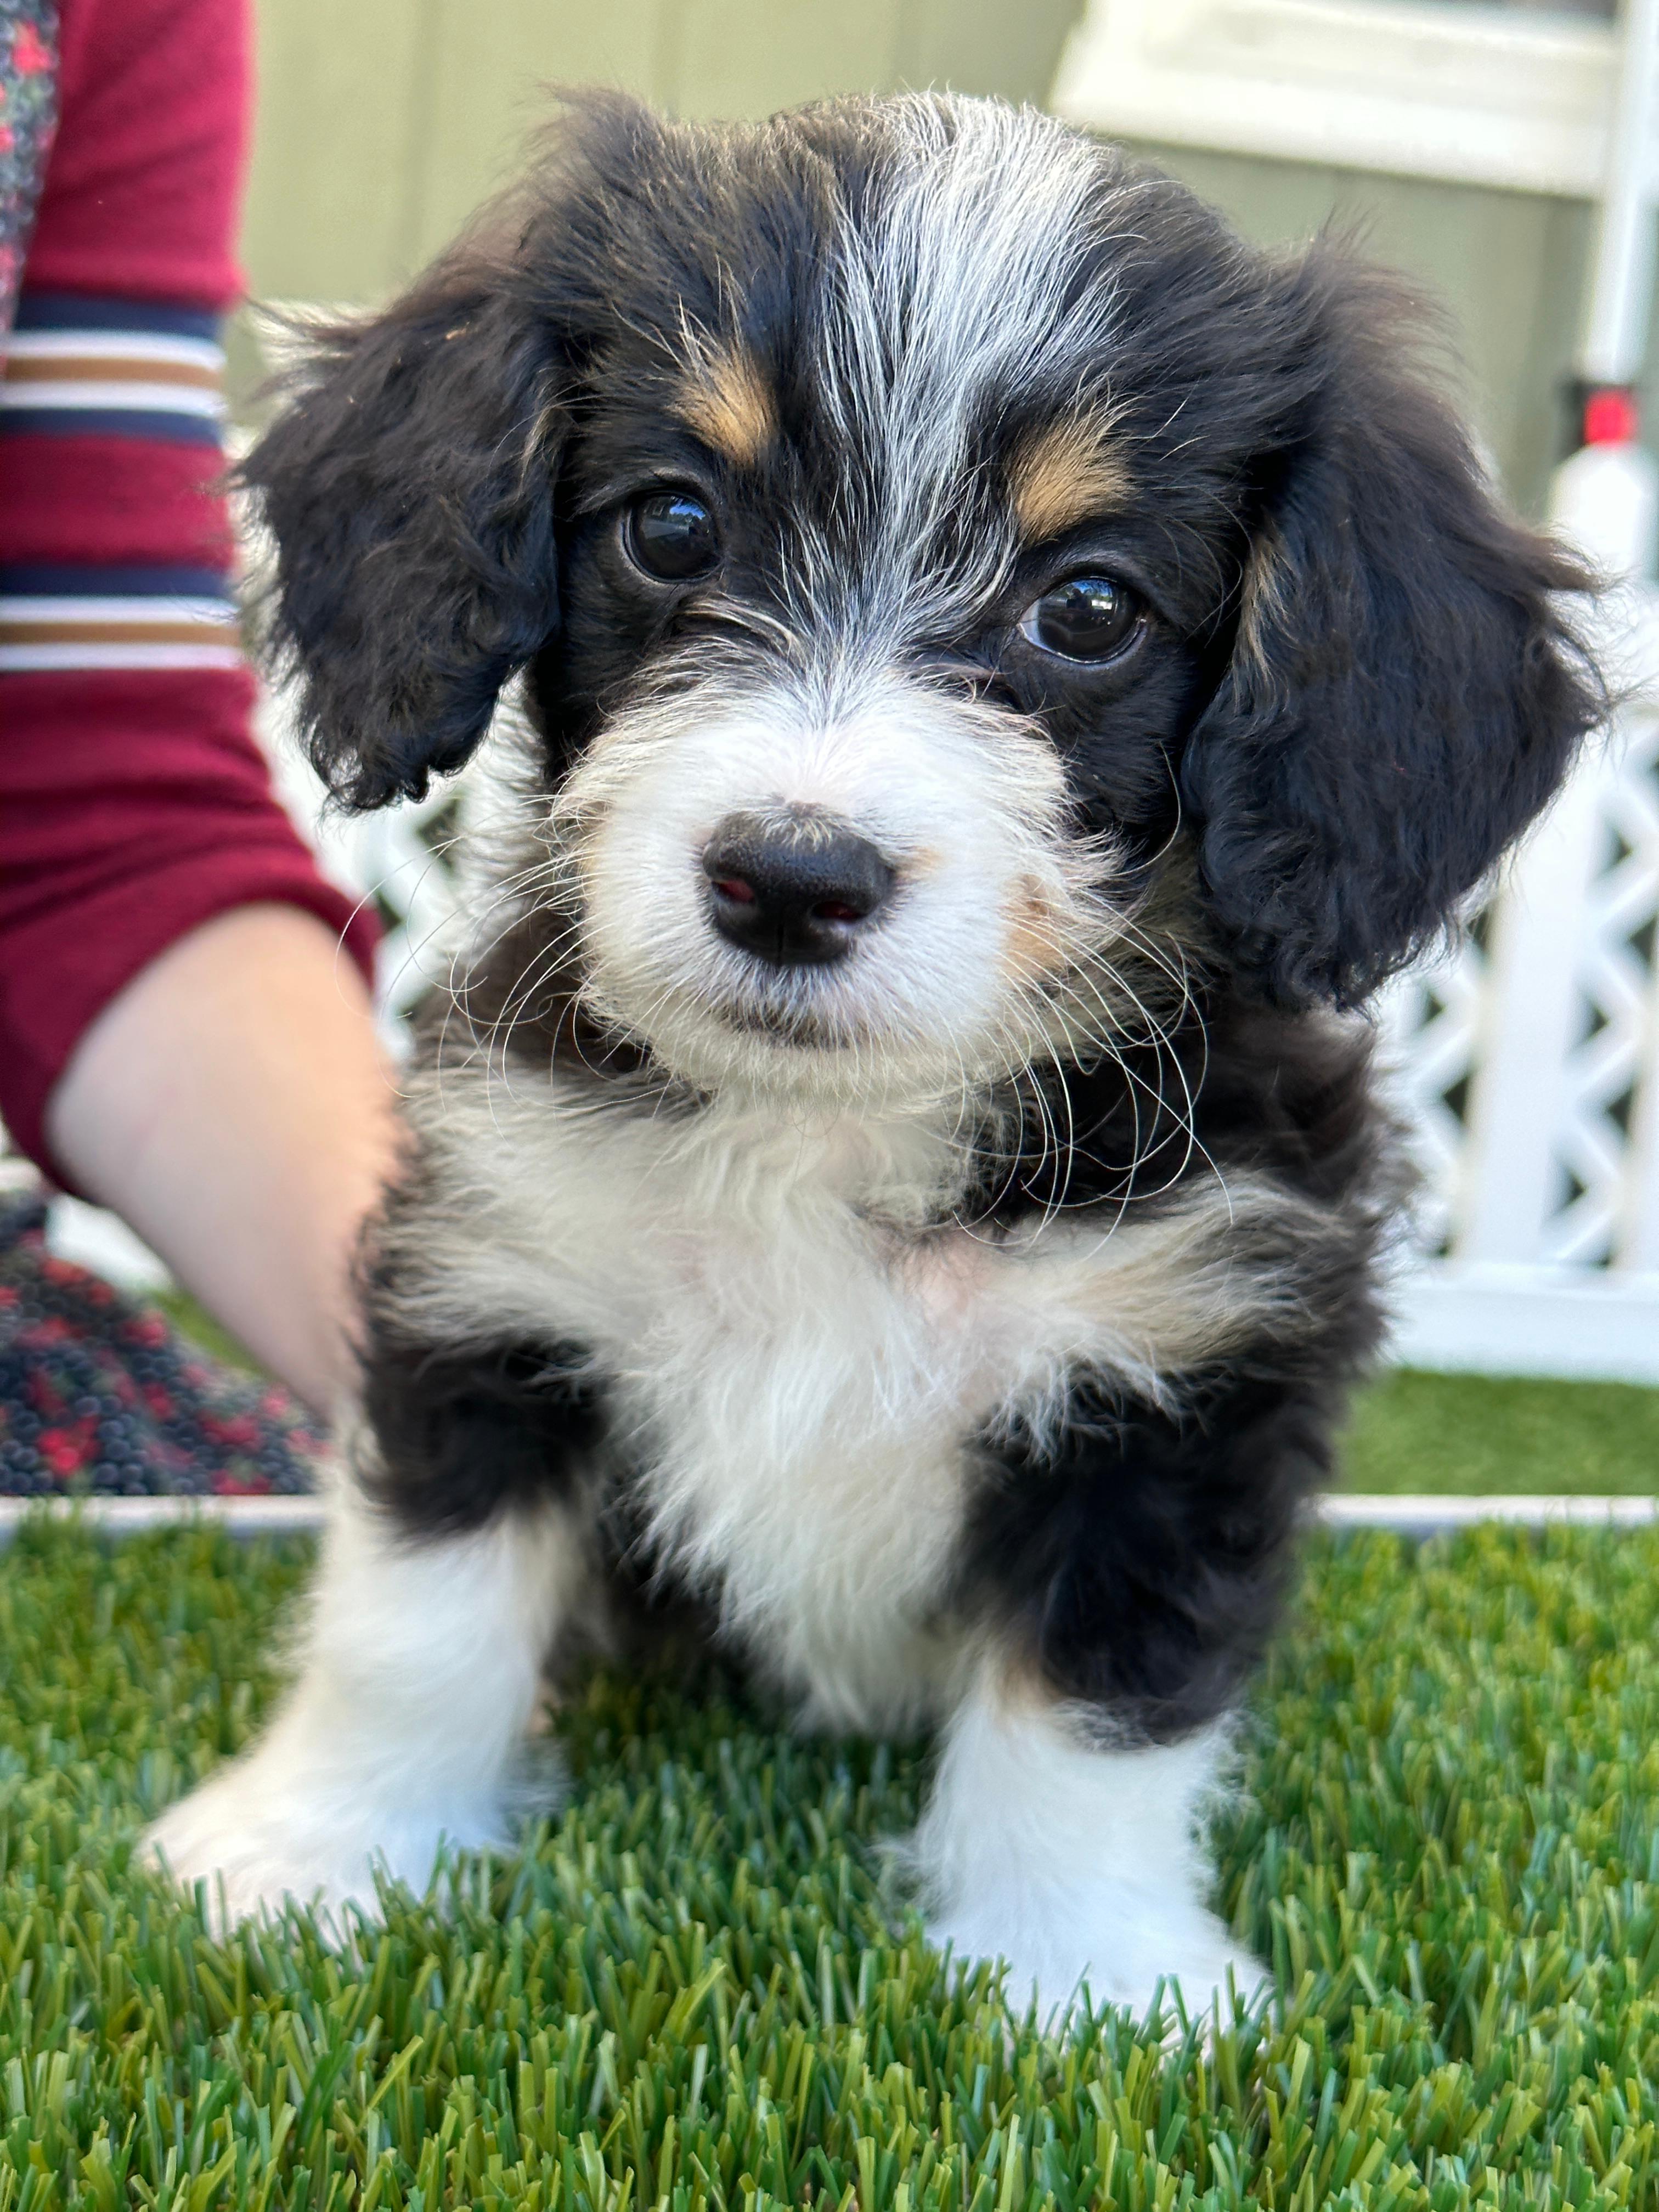 bernedoodles - call us for availability! Hess Family Beautiful Puppies Russell (413)310-6722